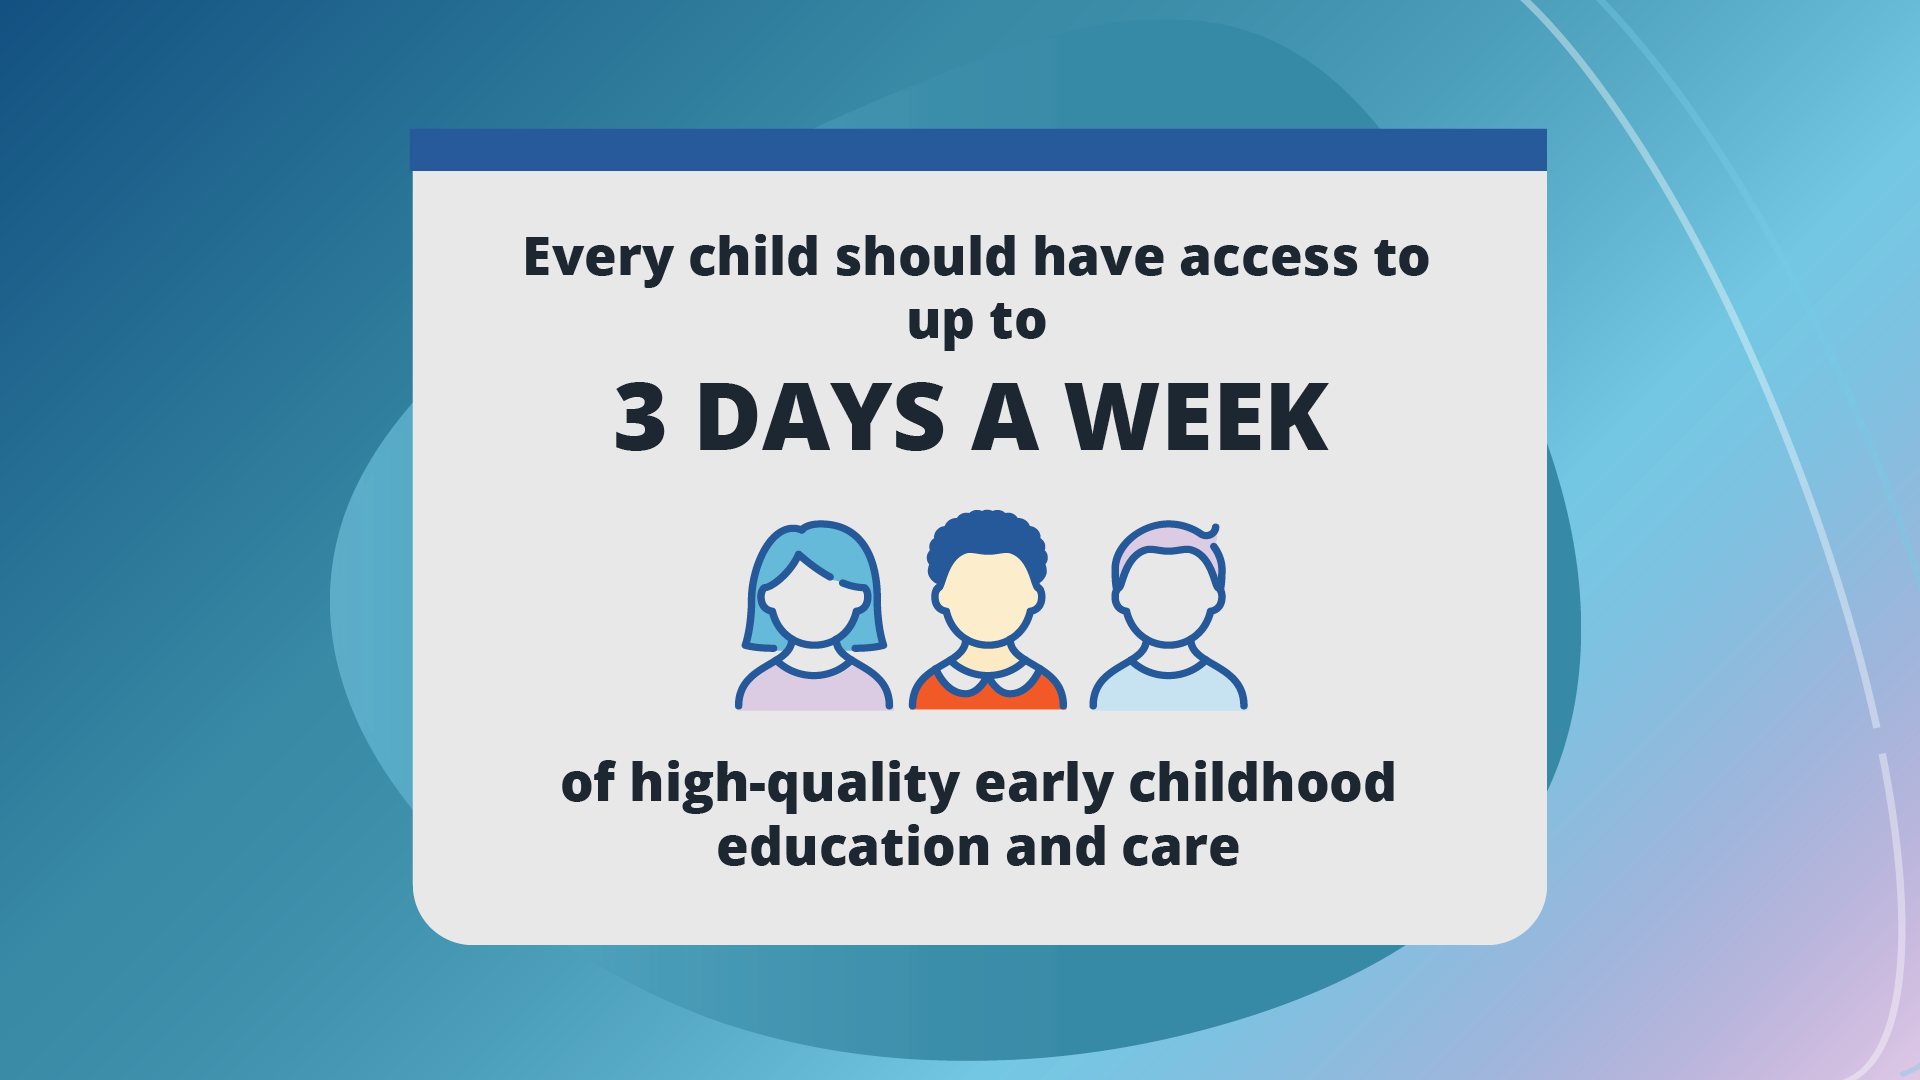 Every child should have access to up to 3 days a week of high-quality early childhood education and care.